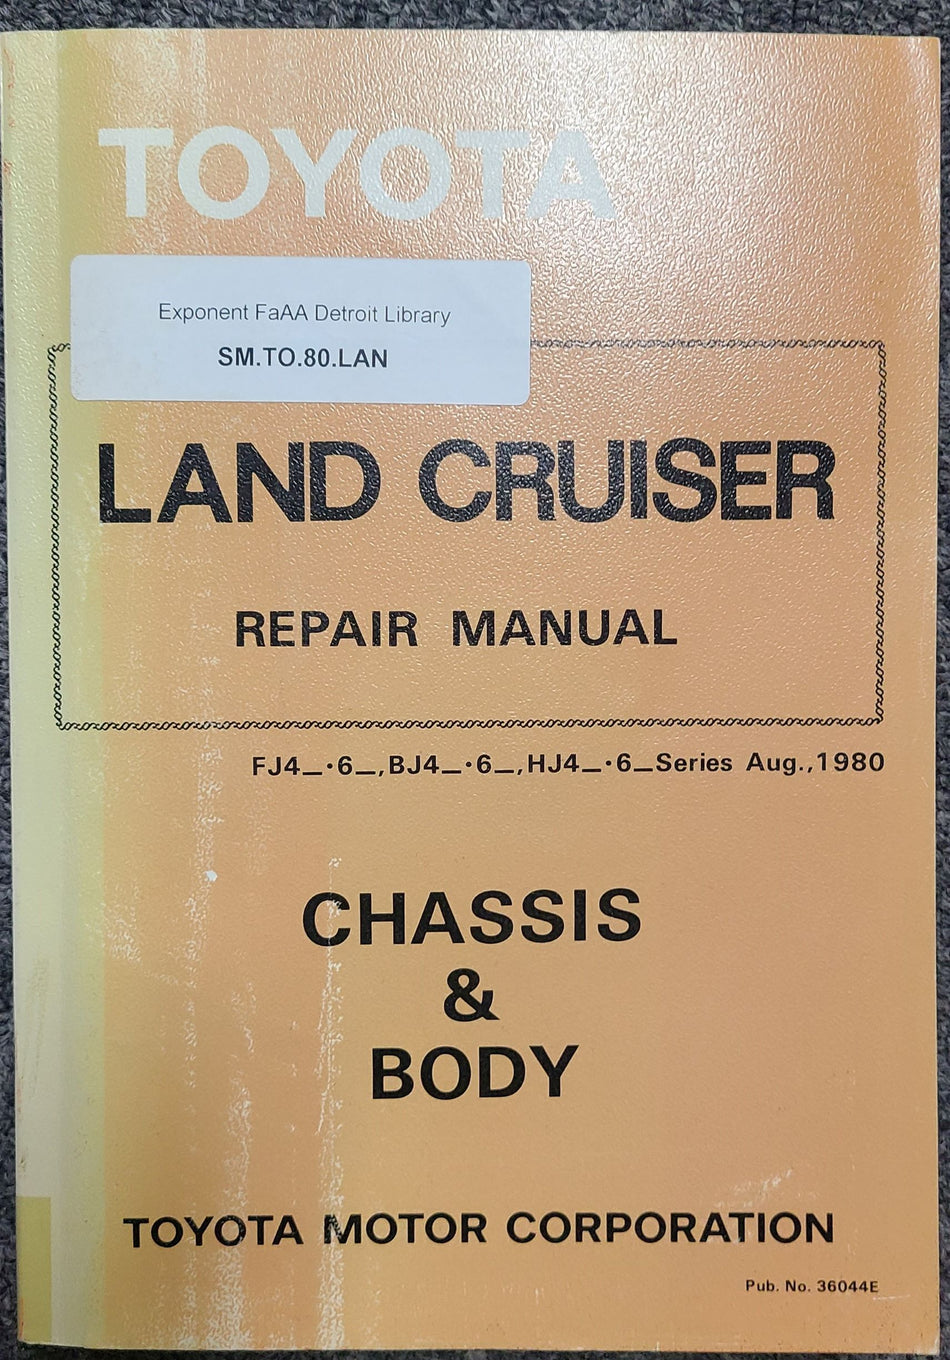 Toyota Land Cruiser Manual 40-47 Series 60 Series Chassis & Body 1980